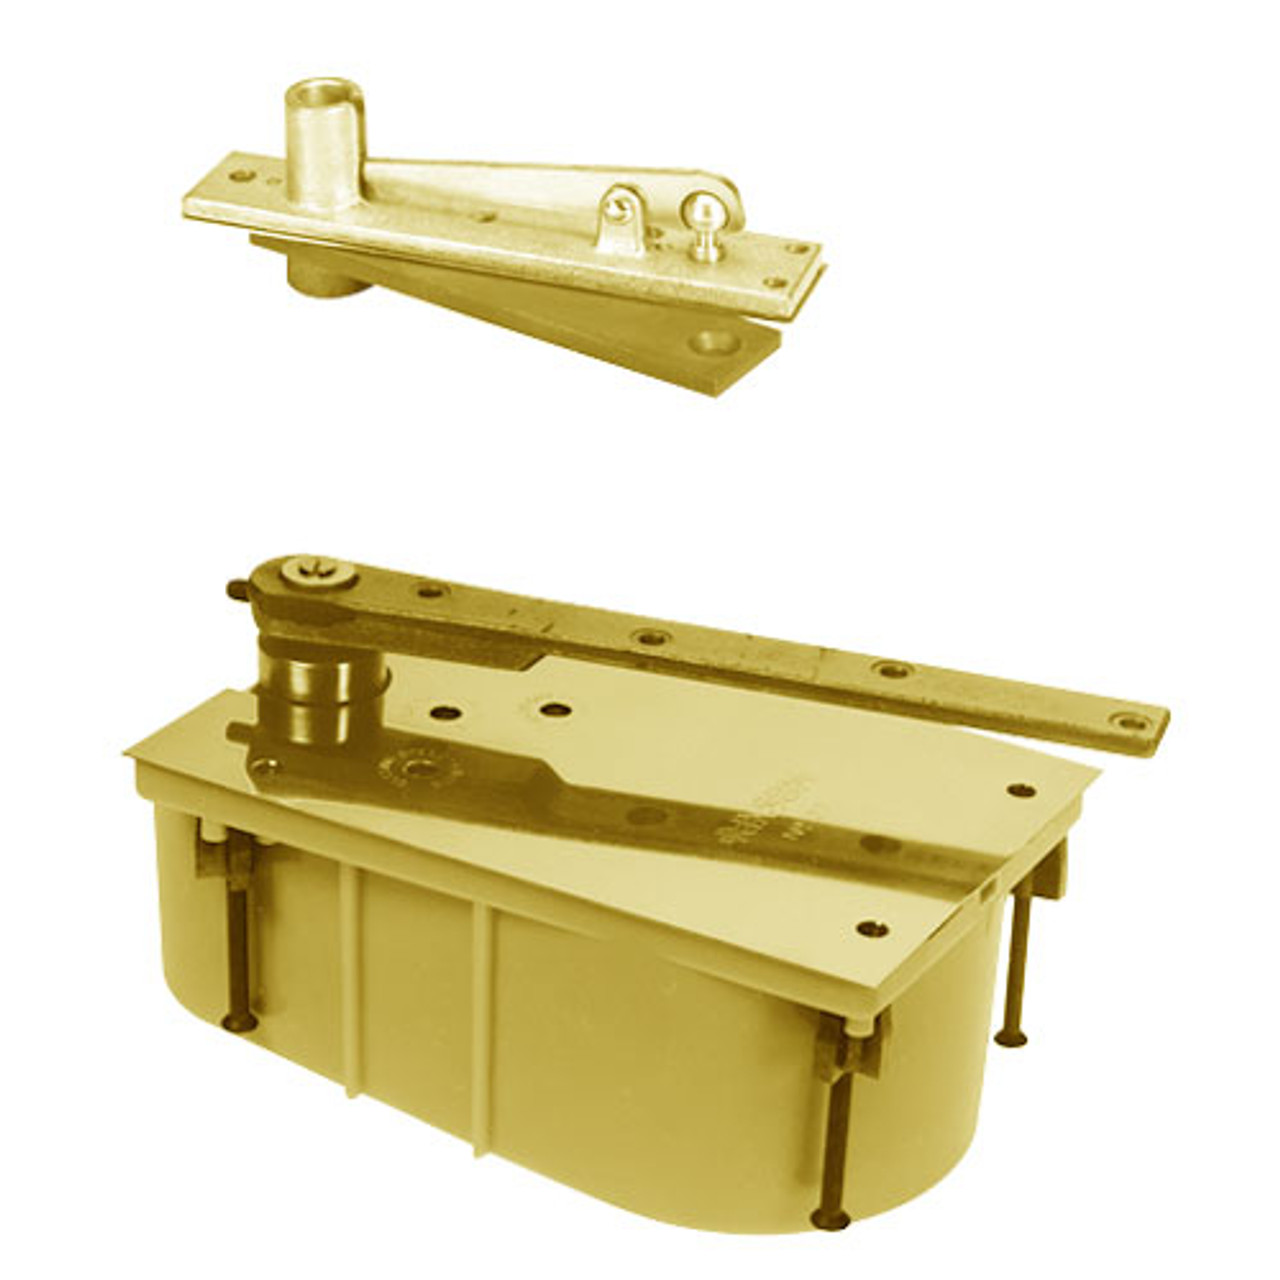 SC28-90N-554-CWF-LH-605 Rixson 28 Series Heavy Duty Single Acting Center Hung Floor Closer with Concealed Arm in Bright Brass Finish